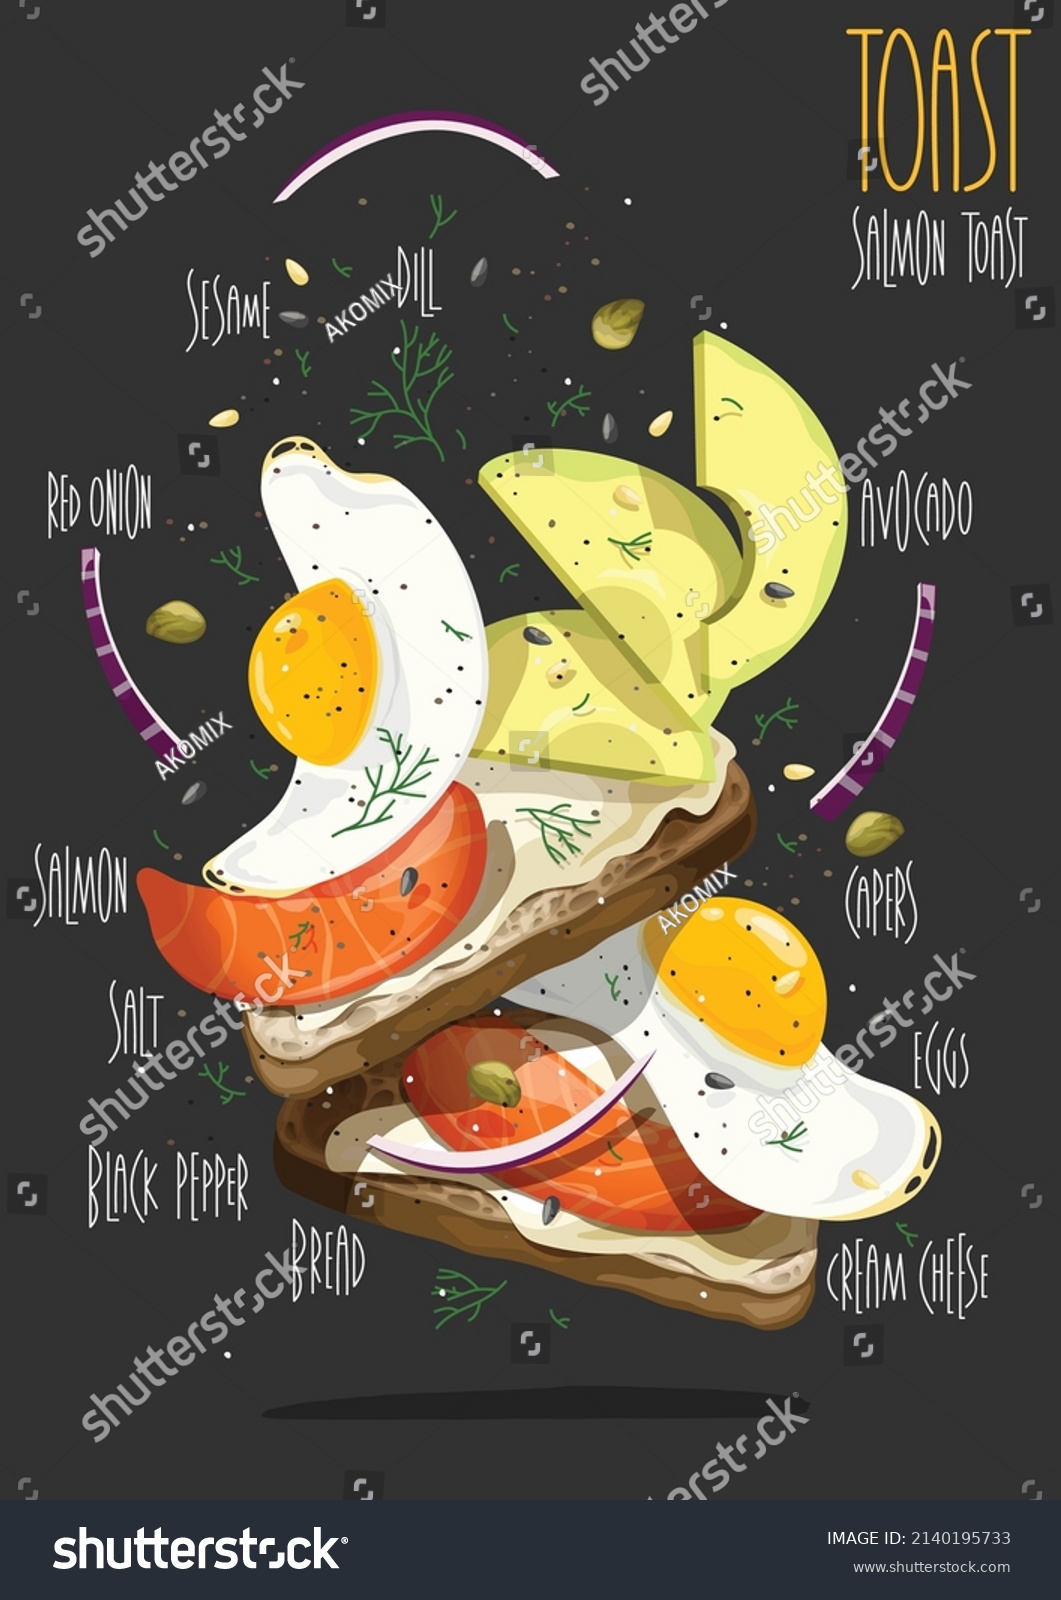 SVG of Toast with cream cheese, salmon, capers, red onion, eggs, avocado on whole grain toast bread. Vector illustration svg